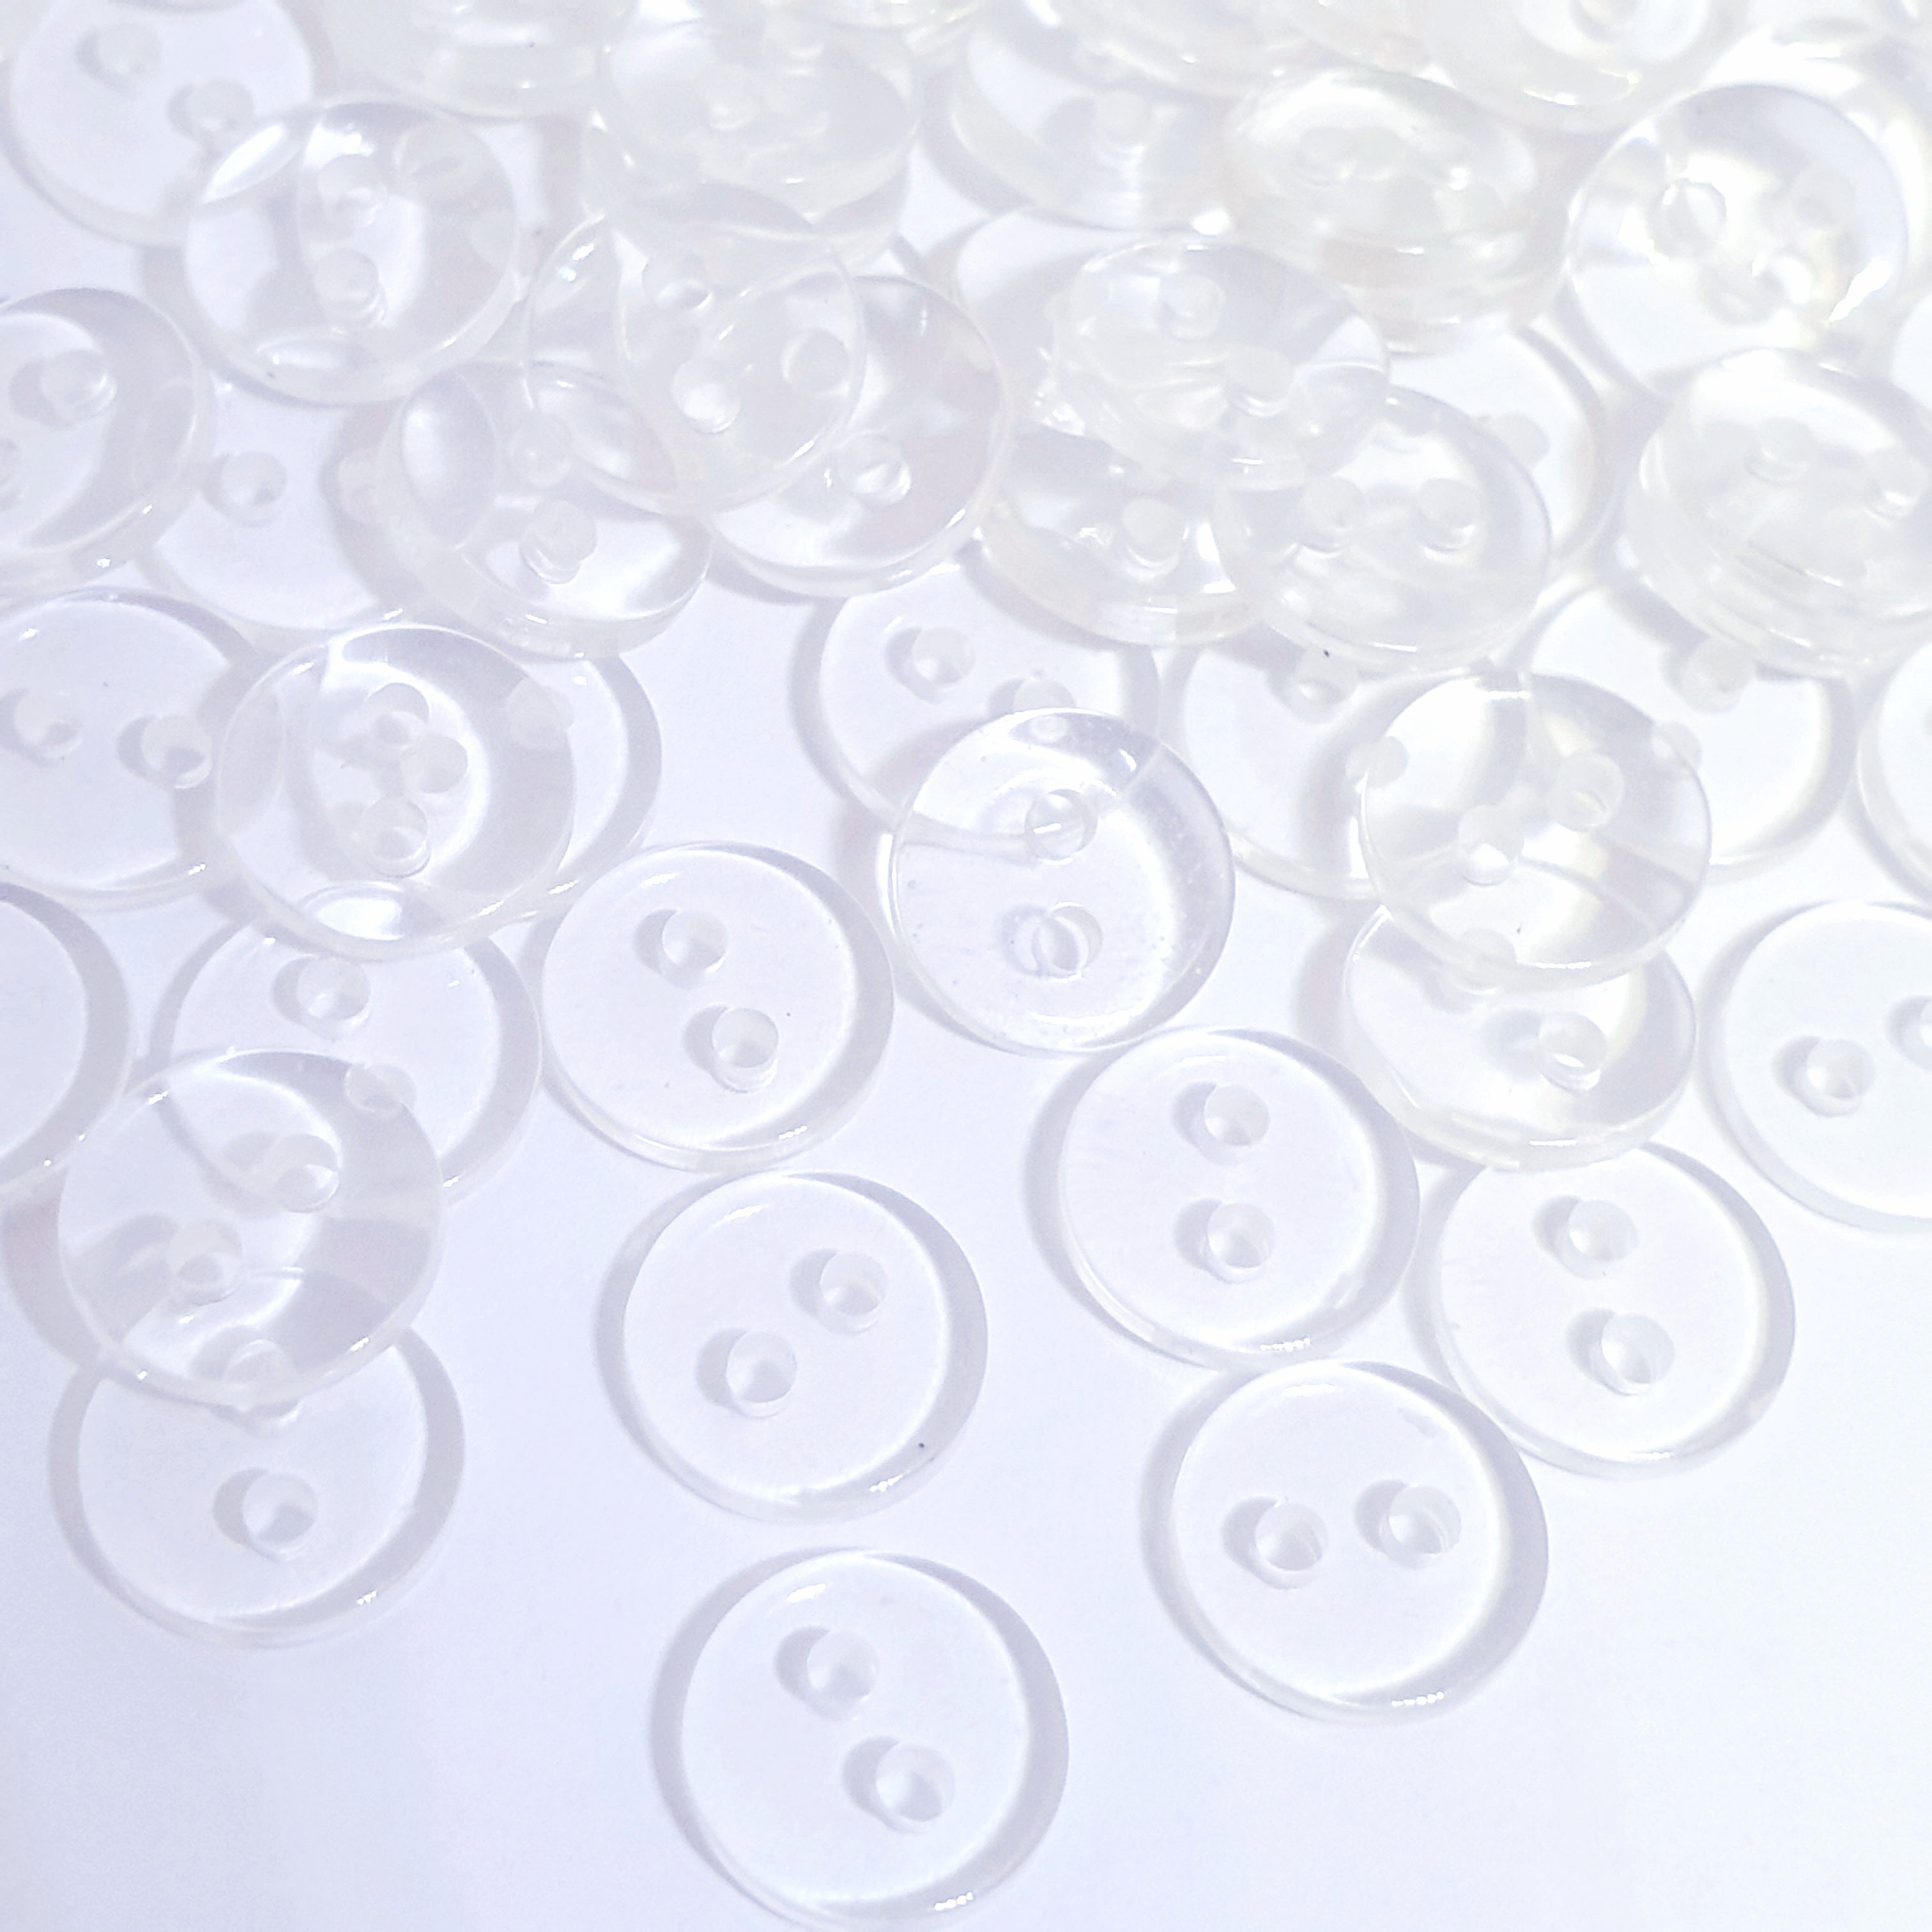 MajorCrafts 120pcs 10mm Transparent Clear 2 Holes Small Round Resin Sewing Buttons